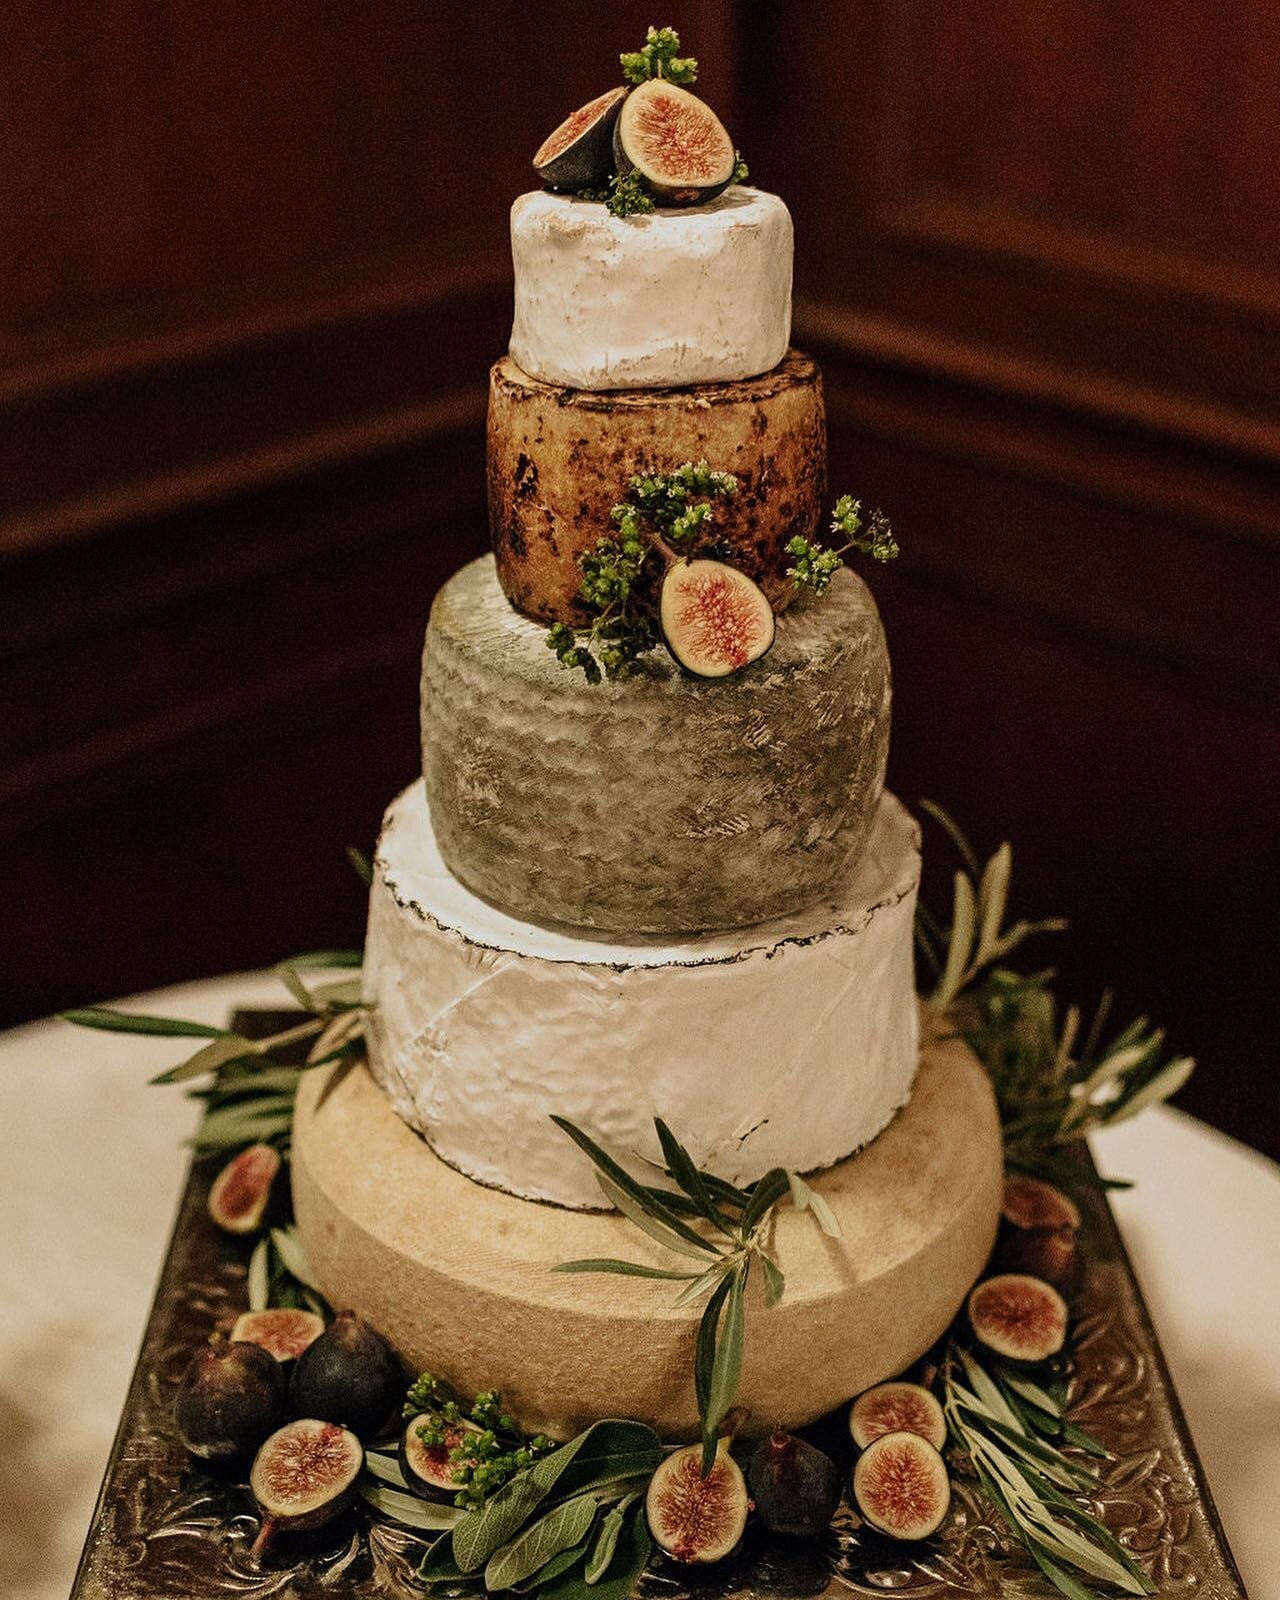 Make traditions your own!  This couple wanted to do a &ldquo;cake cutting&rdquo; but LOVES cheese, so we got a cheese cake!  And yes, it then got served to guests!

Planning  @pinkbowtienyc
Ceremony  @stpatrickscathedral
Reception  @newyorkac
Photo  